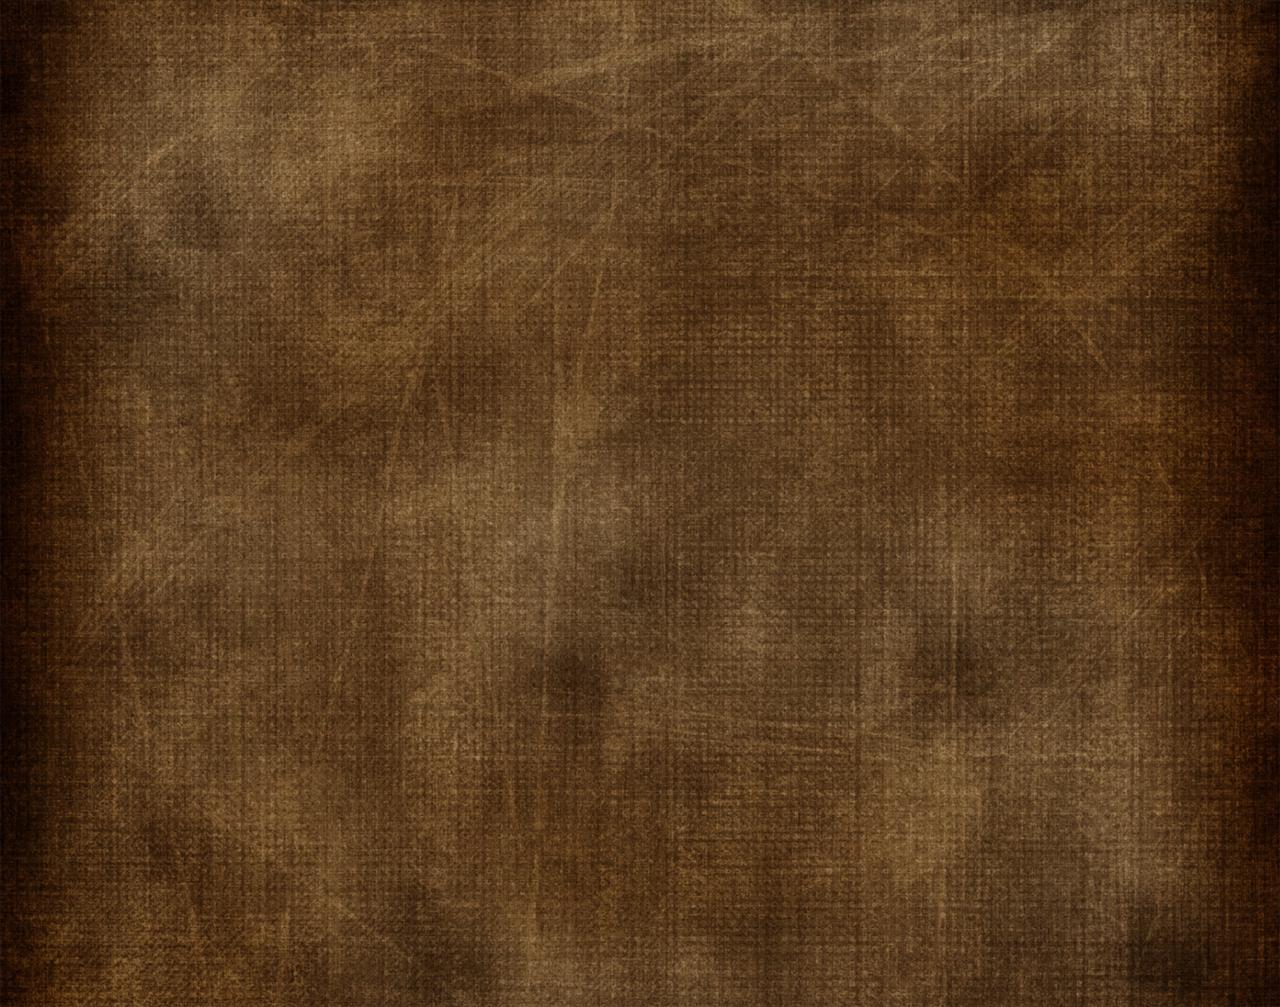 Rustic Related Keywords and Suggestions  Rustic   Wallpaper